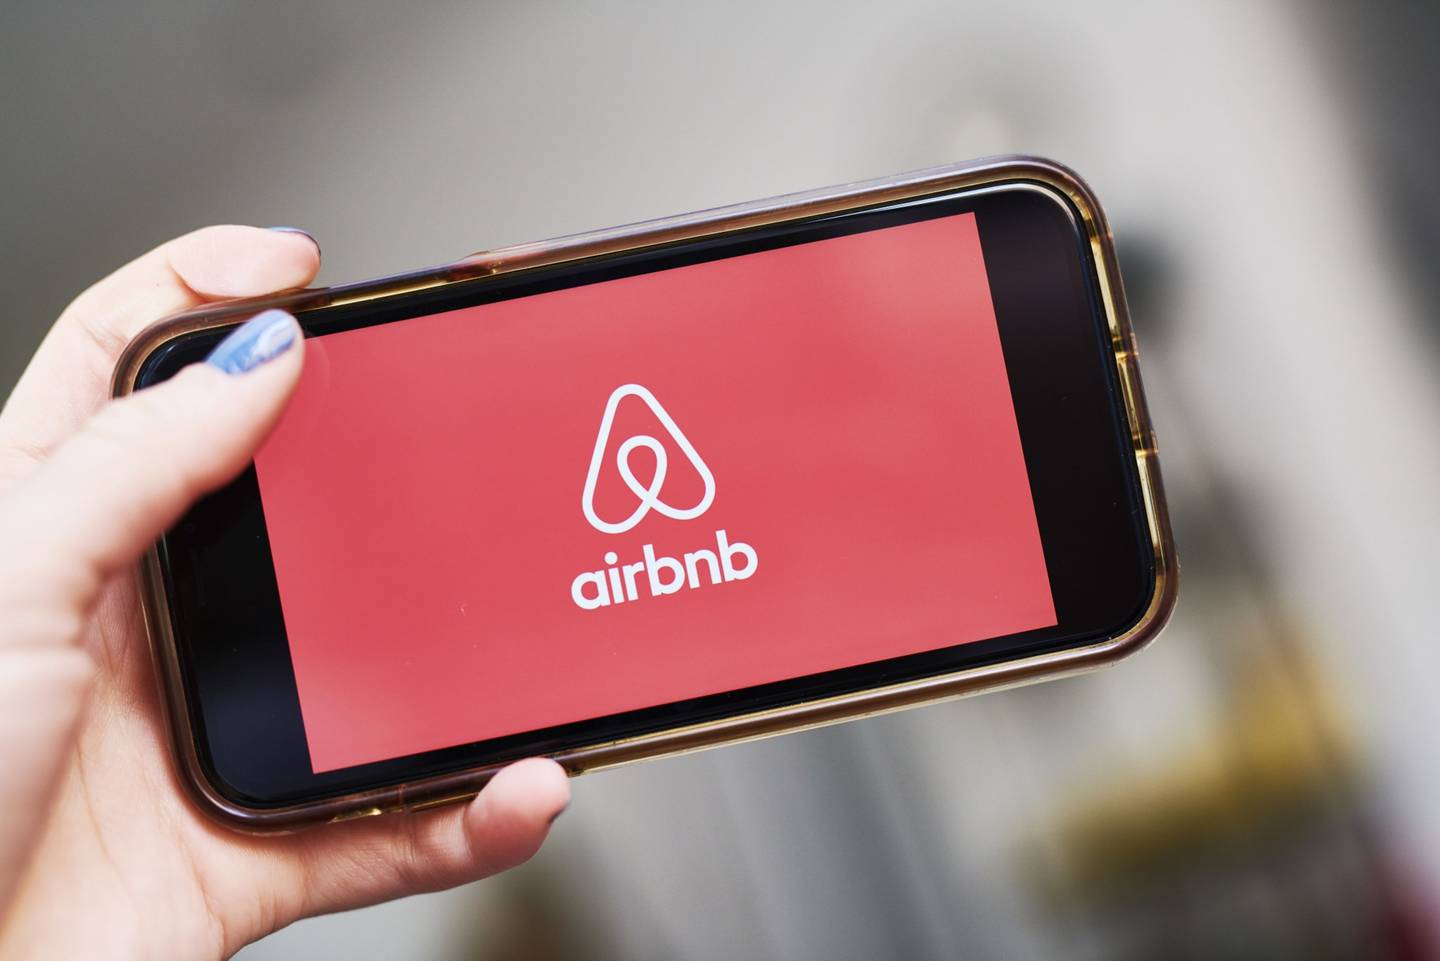 Airbnb has been blamed for forcing locals out of city centres that are popular with tourists. Bloomberg